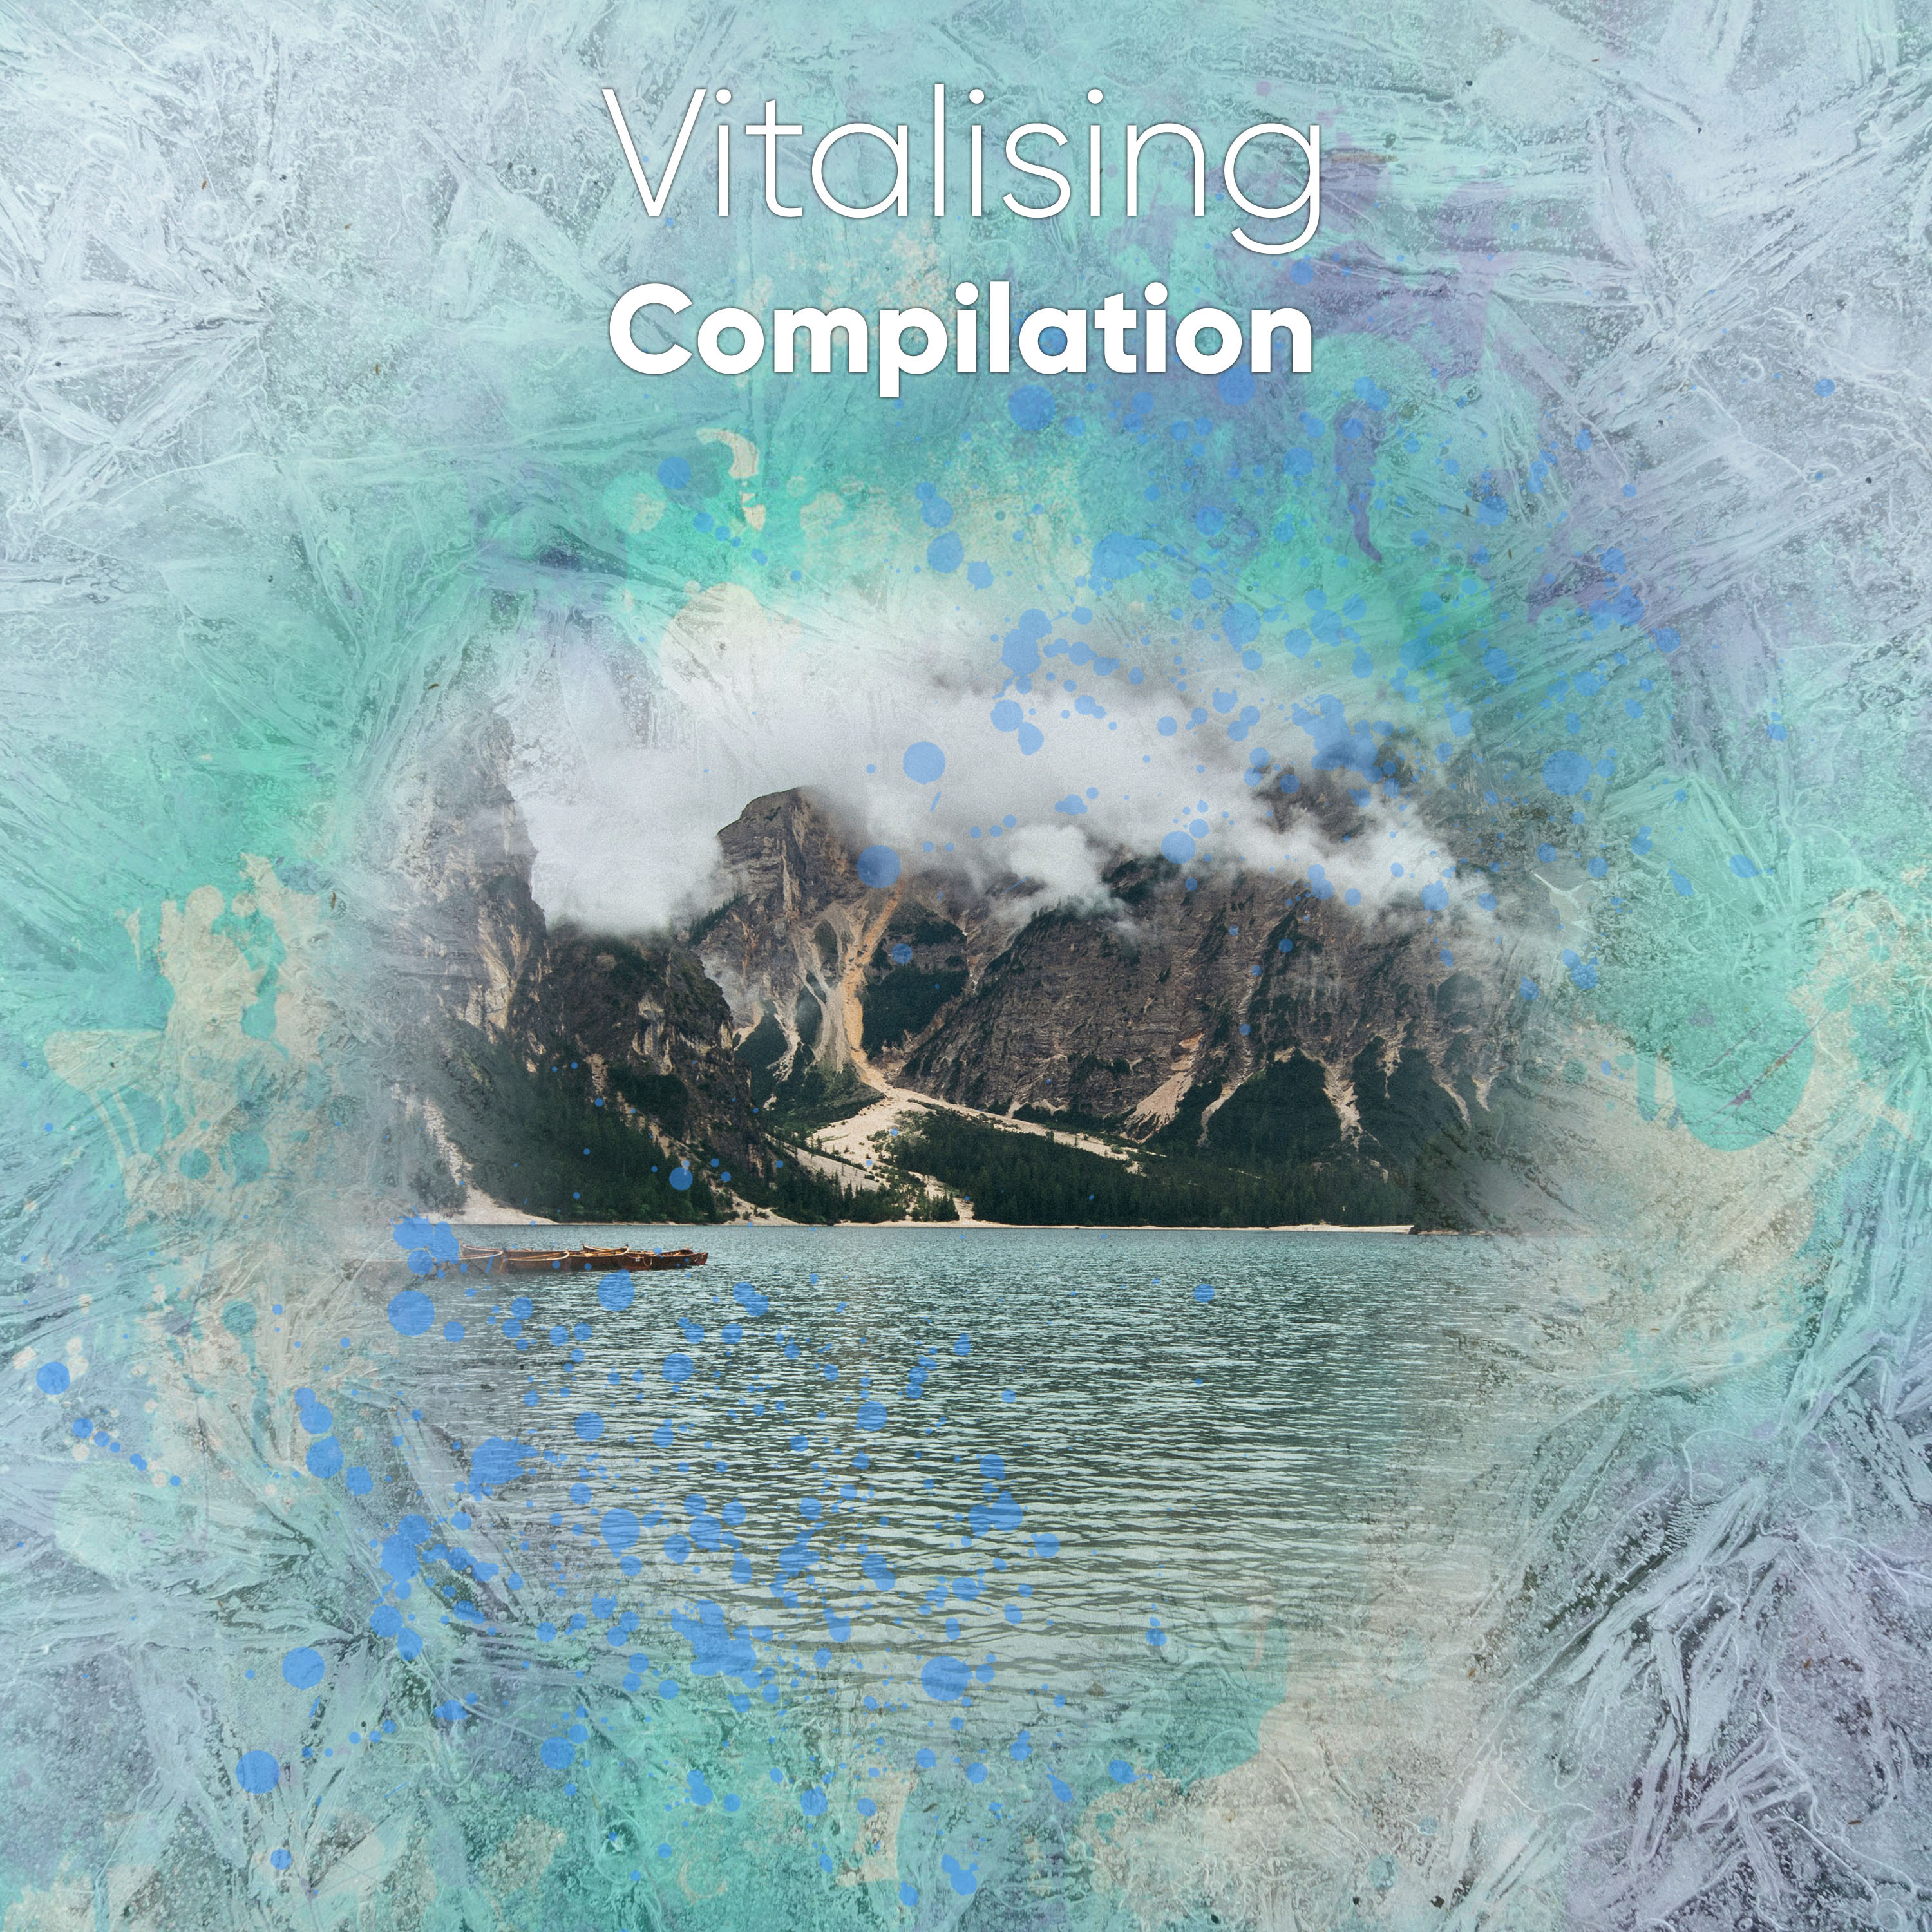 #1 Hour of Vitalising Compilation for a Great Nights Sleep